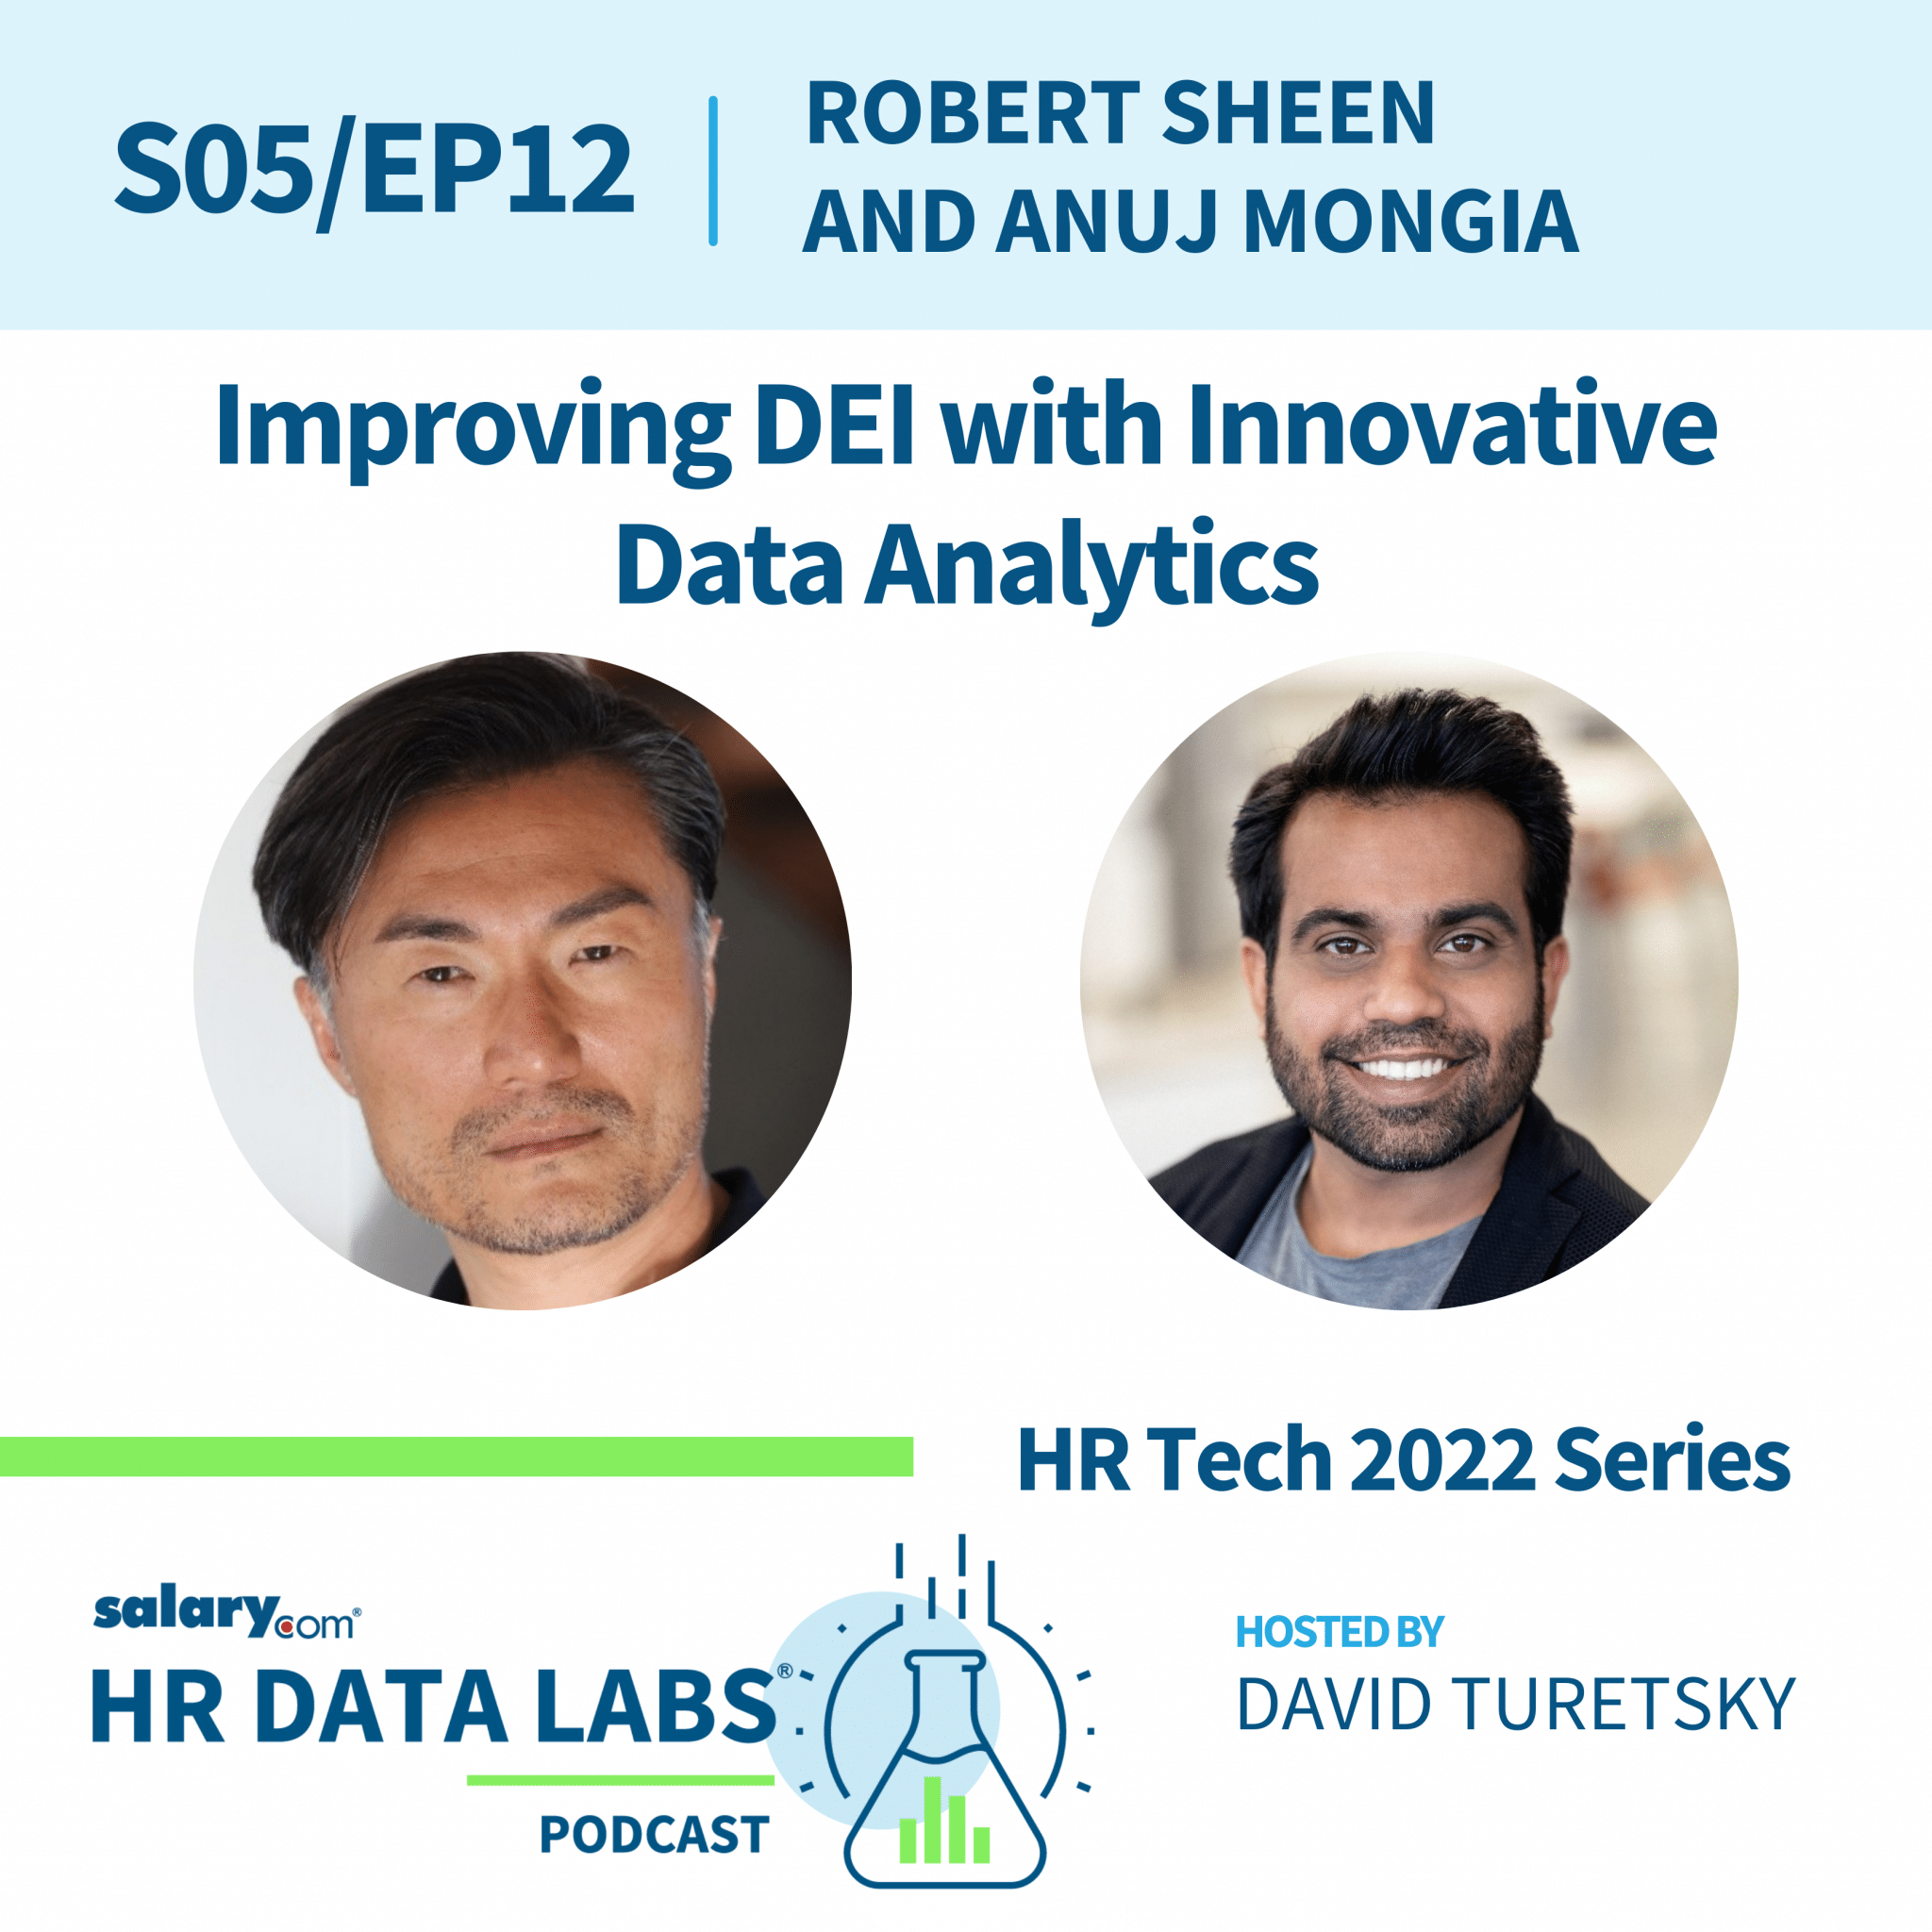 Robert Sheen and Anuj Mongia – HR Tech 2022 Series – Improving DEI with Innovative Data Analytics